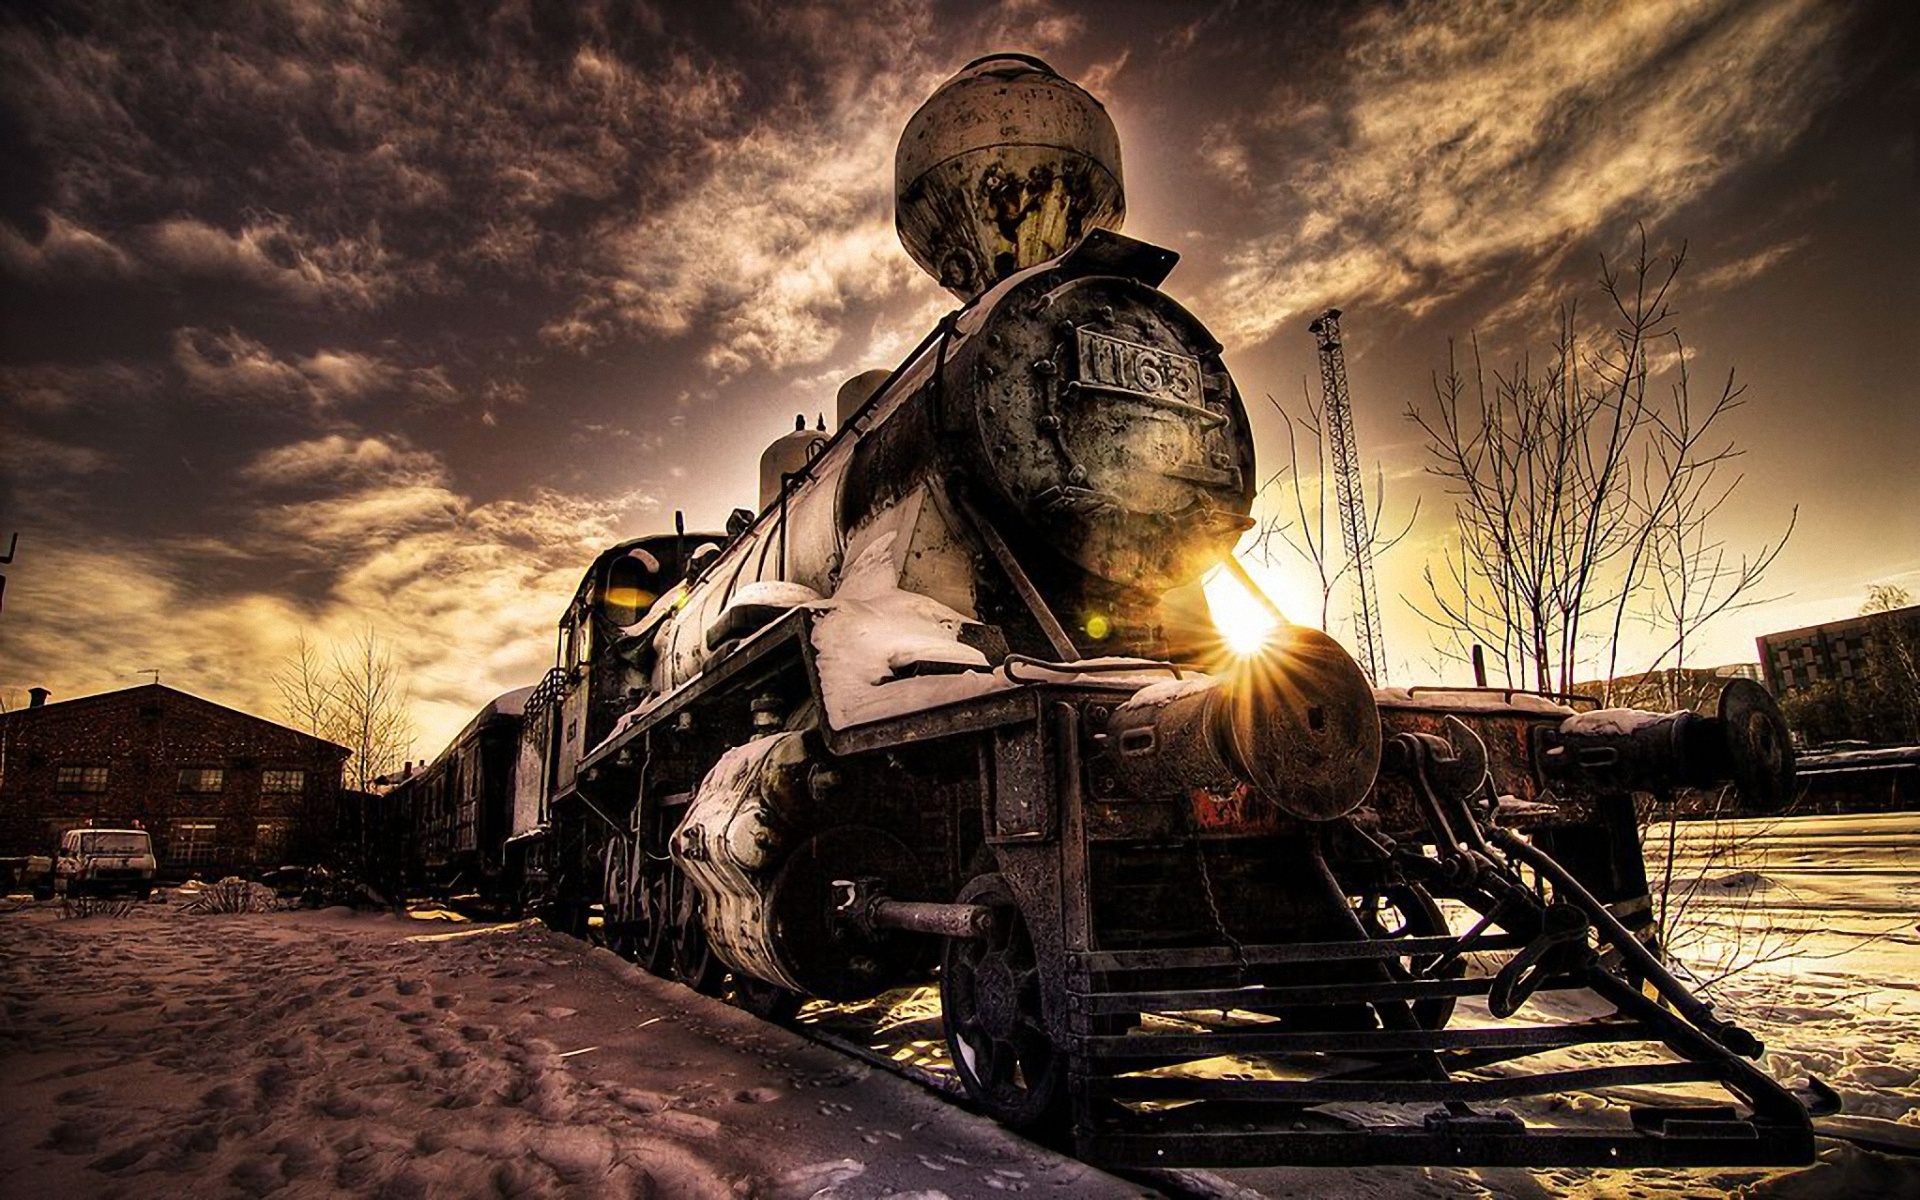 Free download download old train wallpaper which is under the train wallpaper [1920x1200] for your Desktop, Mobile & Tablet. Explore Steam Train Desktop Wallpaper. Steam Locomotive Wallpaper, Train Background